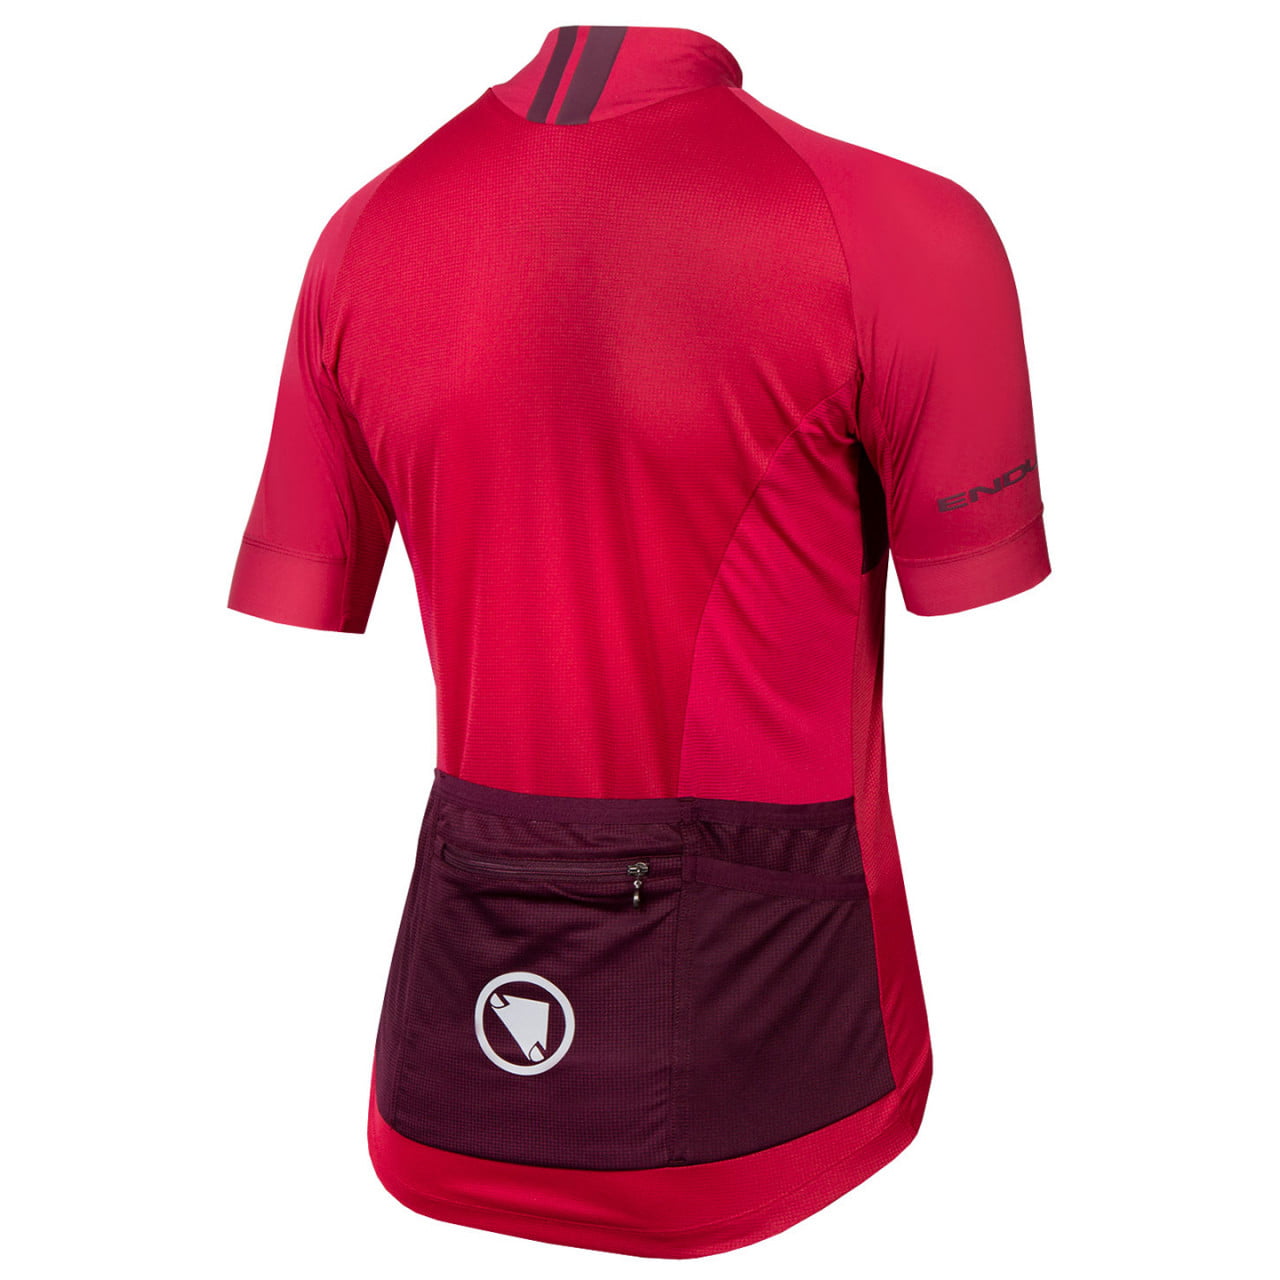 Maillot manches courtes femme FS260-Pro II